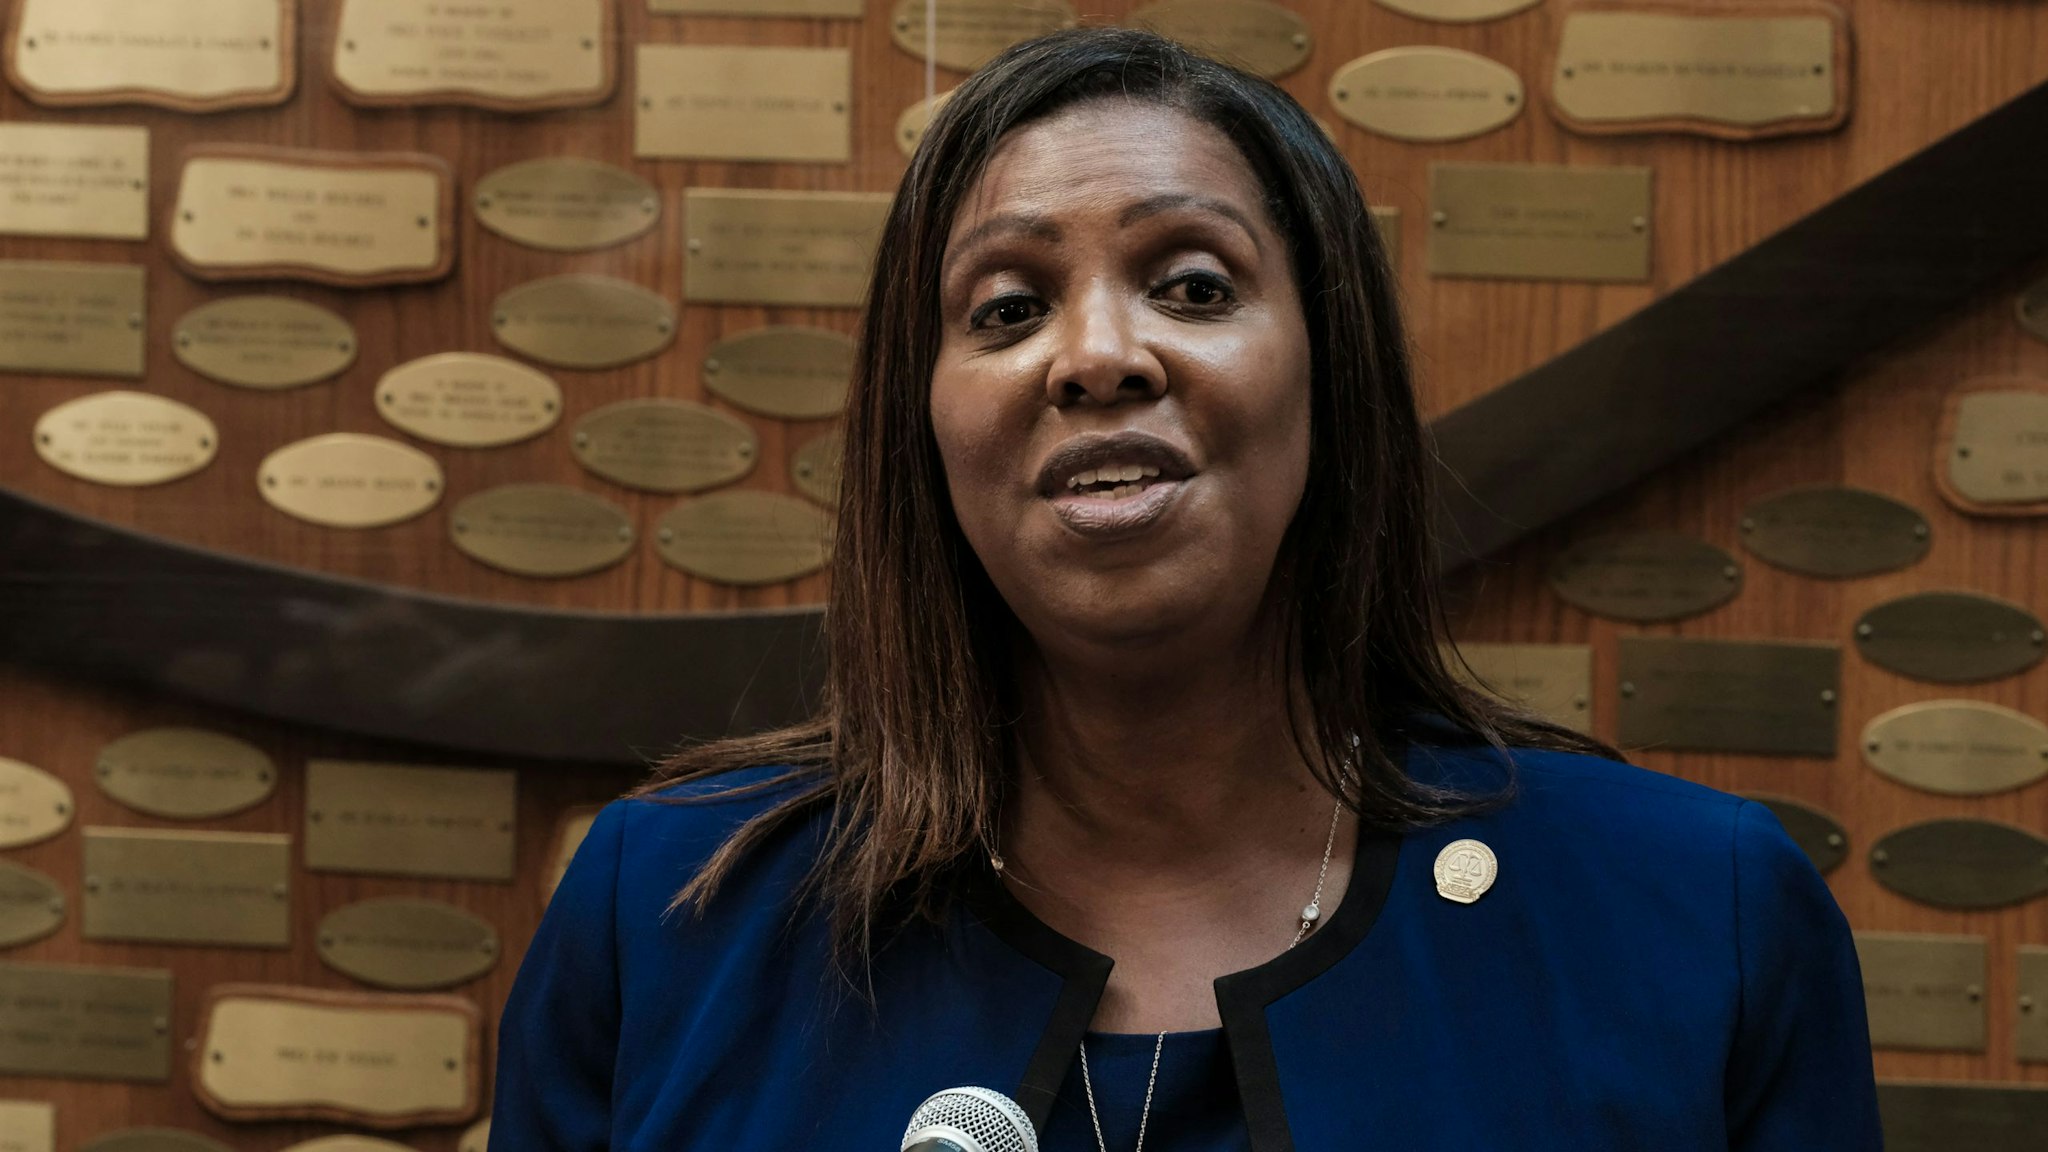 ROCHESTER, NY - SEPTEMBER 20: New York State Attorney General Letitia James speaks at a news conference about the ongoing investigation into the death of Daniel Prude on September 20, 2020 in Rochester, New York. Prude, who is Black, died March 30 after being taken off life support following his arrest by Rochester police.